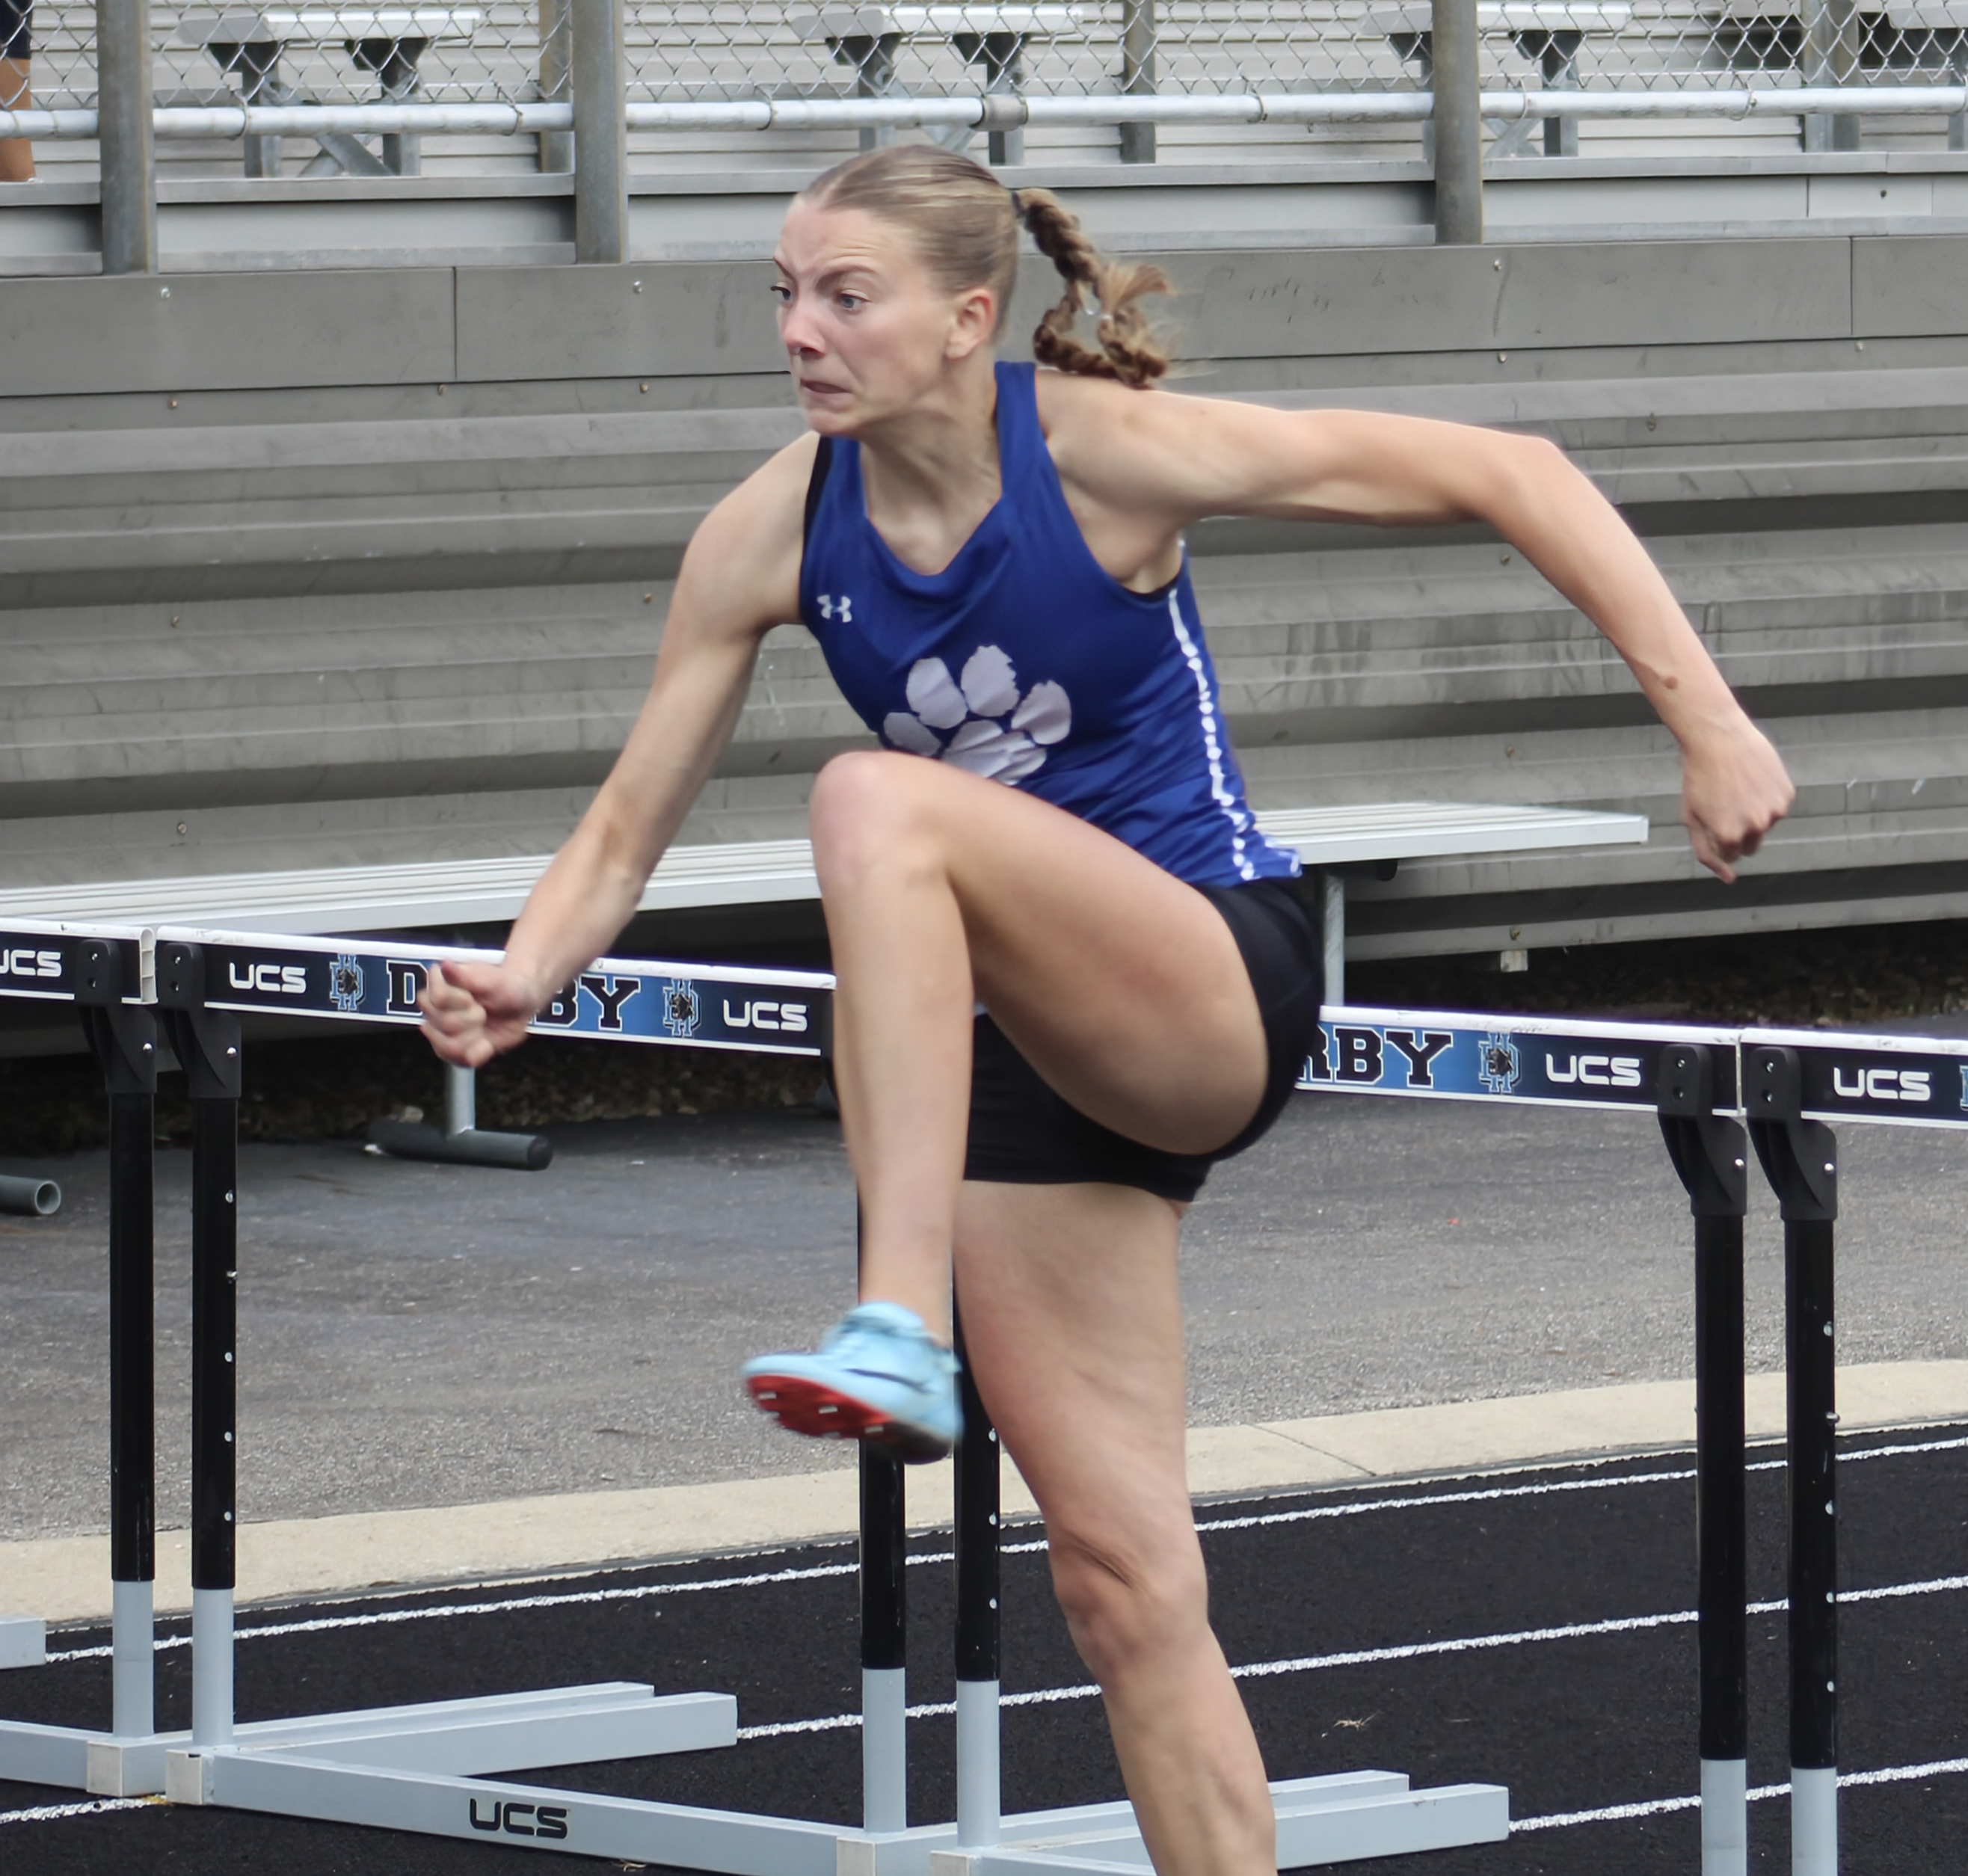 OHSAA girls track and field: 5 central Ohio storylines to watch entering regional meets